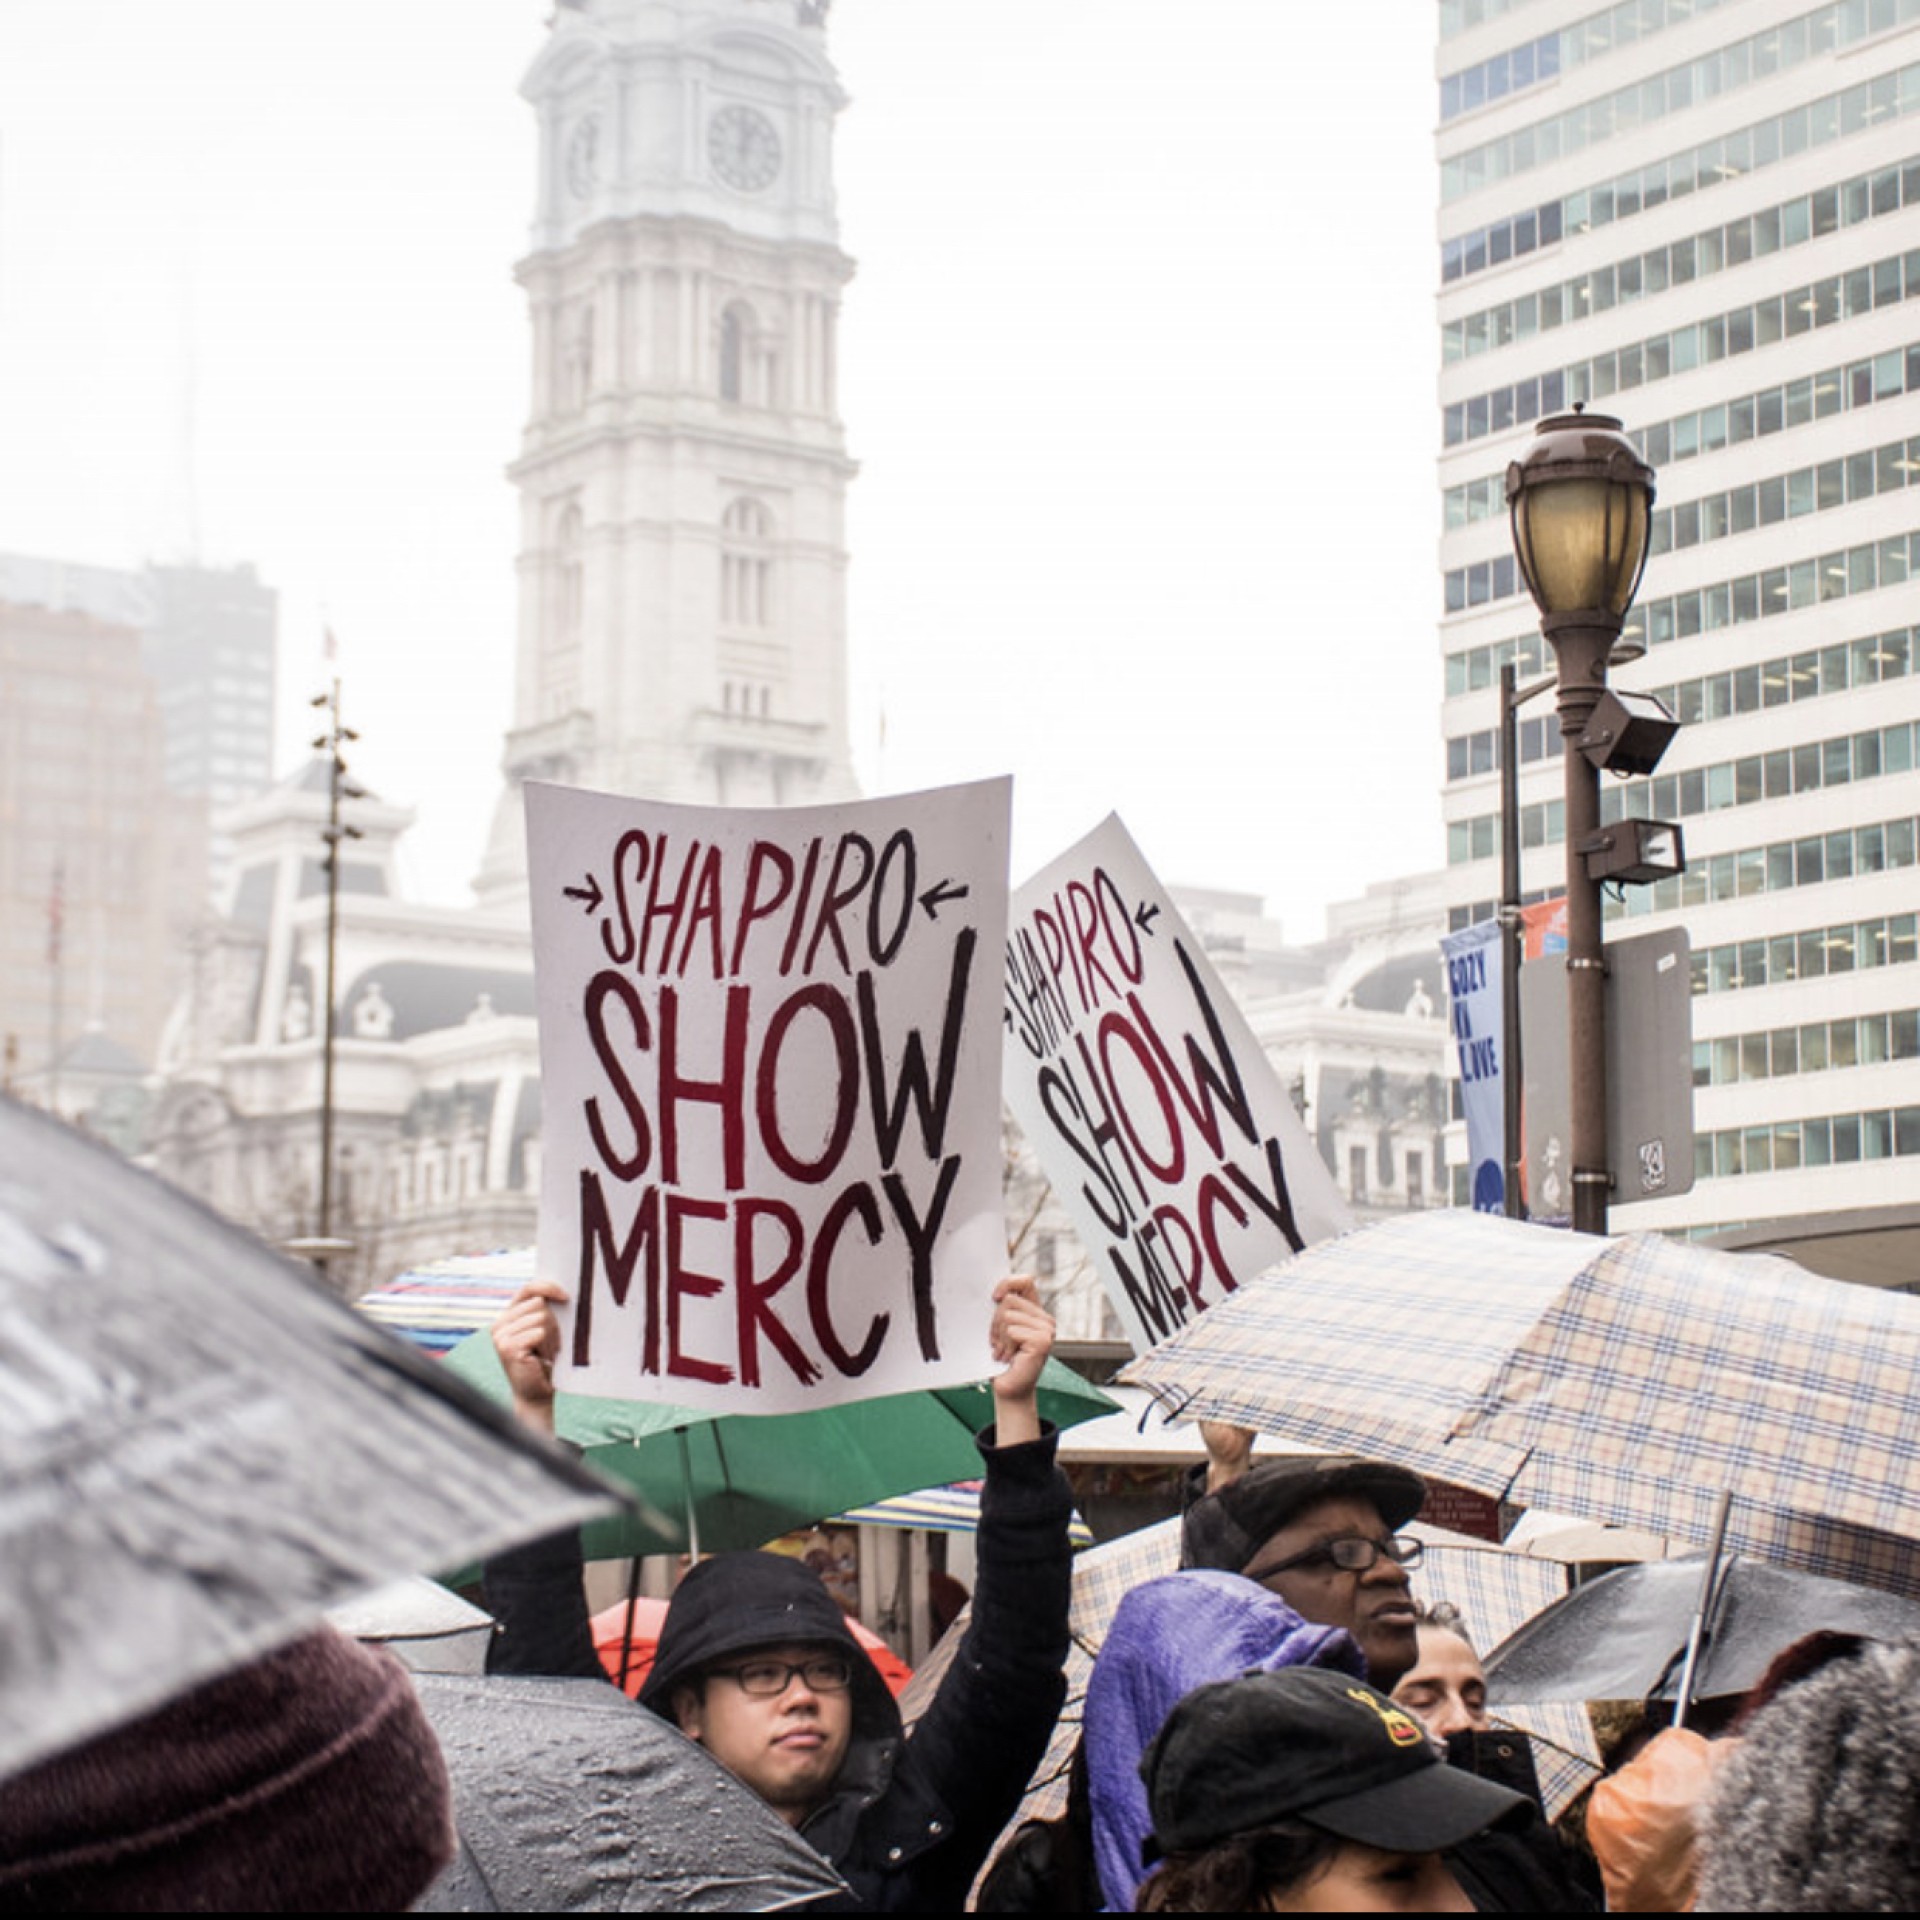 A person at a protest holds a sign that says 'Shapiro Show Mercy' in a sea of umbrellas